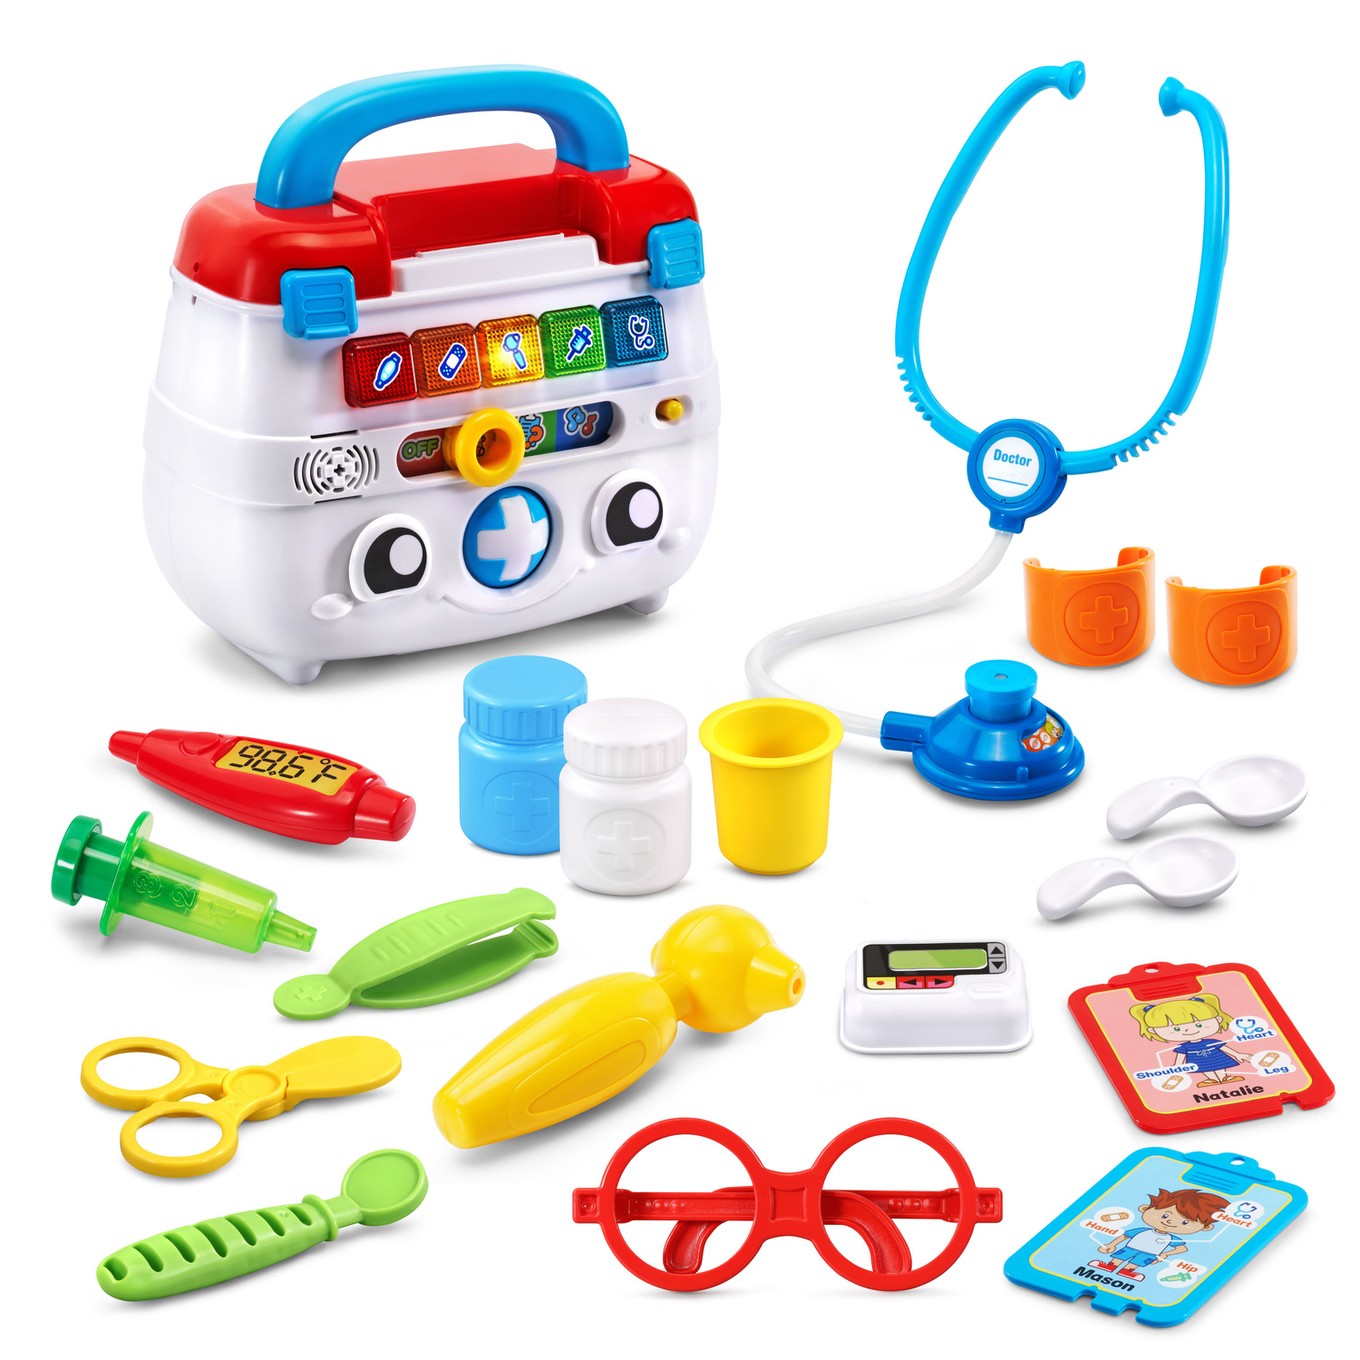 https://www.vtechtoys.com/assets/data/products/%7BF56545C7-5CAA-406A-BC75-0670A5BB98A5%7D/images/80-178370-Main_large.jpg